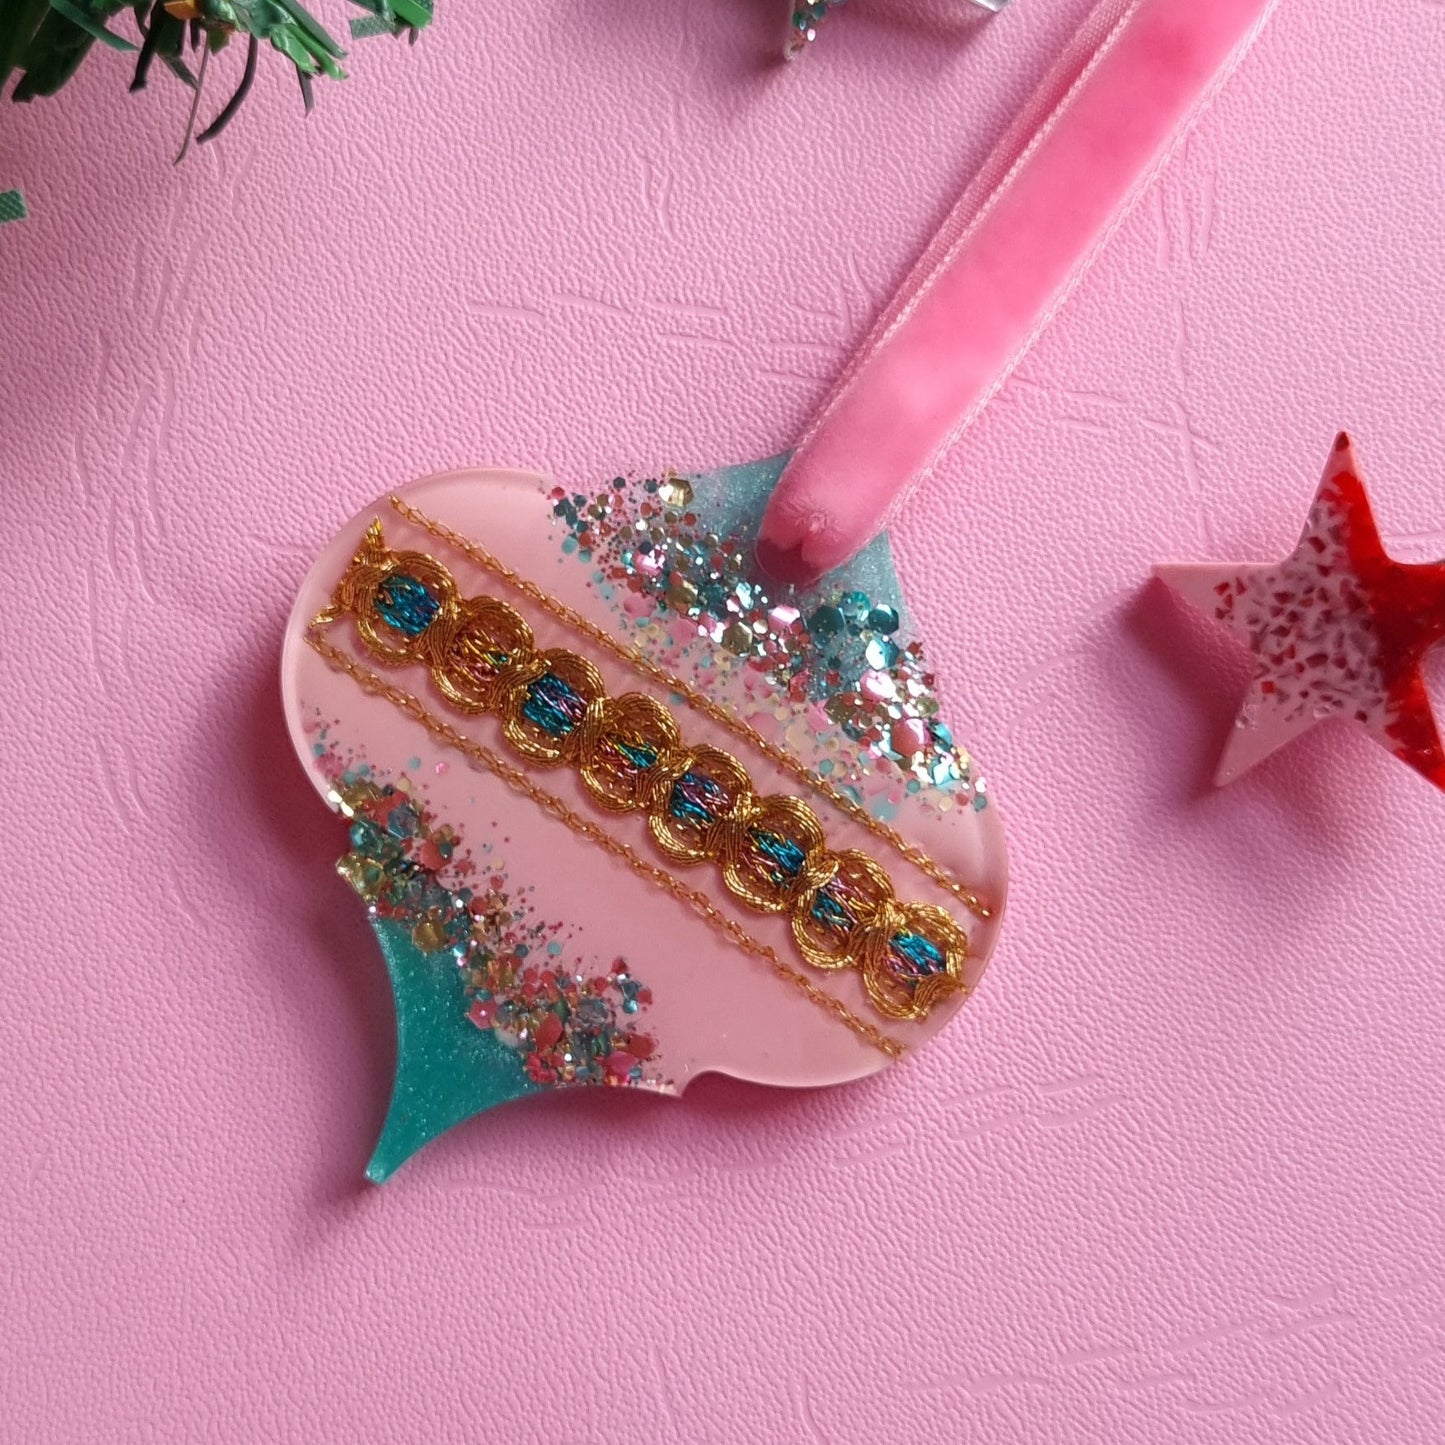 Sugared Almond Pink and Teal Resin Christmas Decoration with Vintage Ribbon